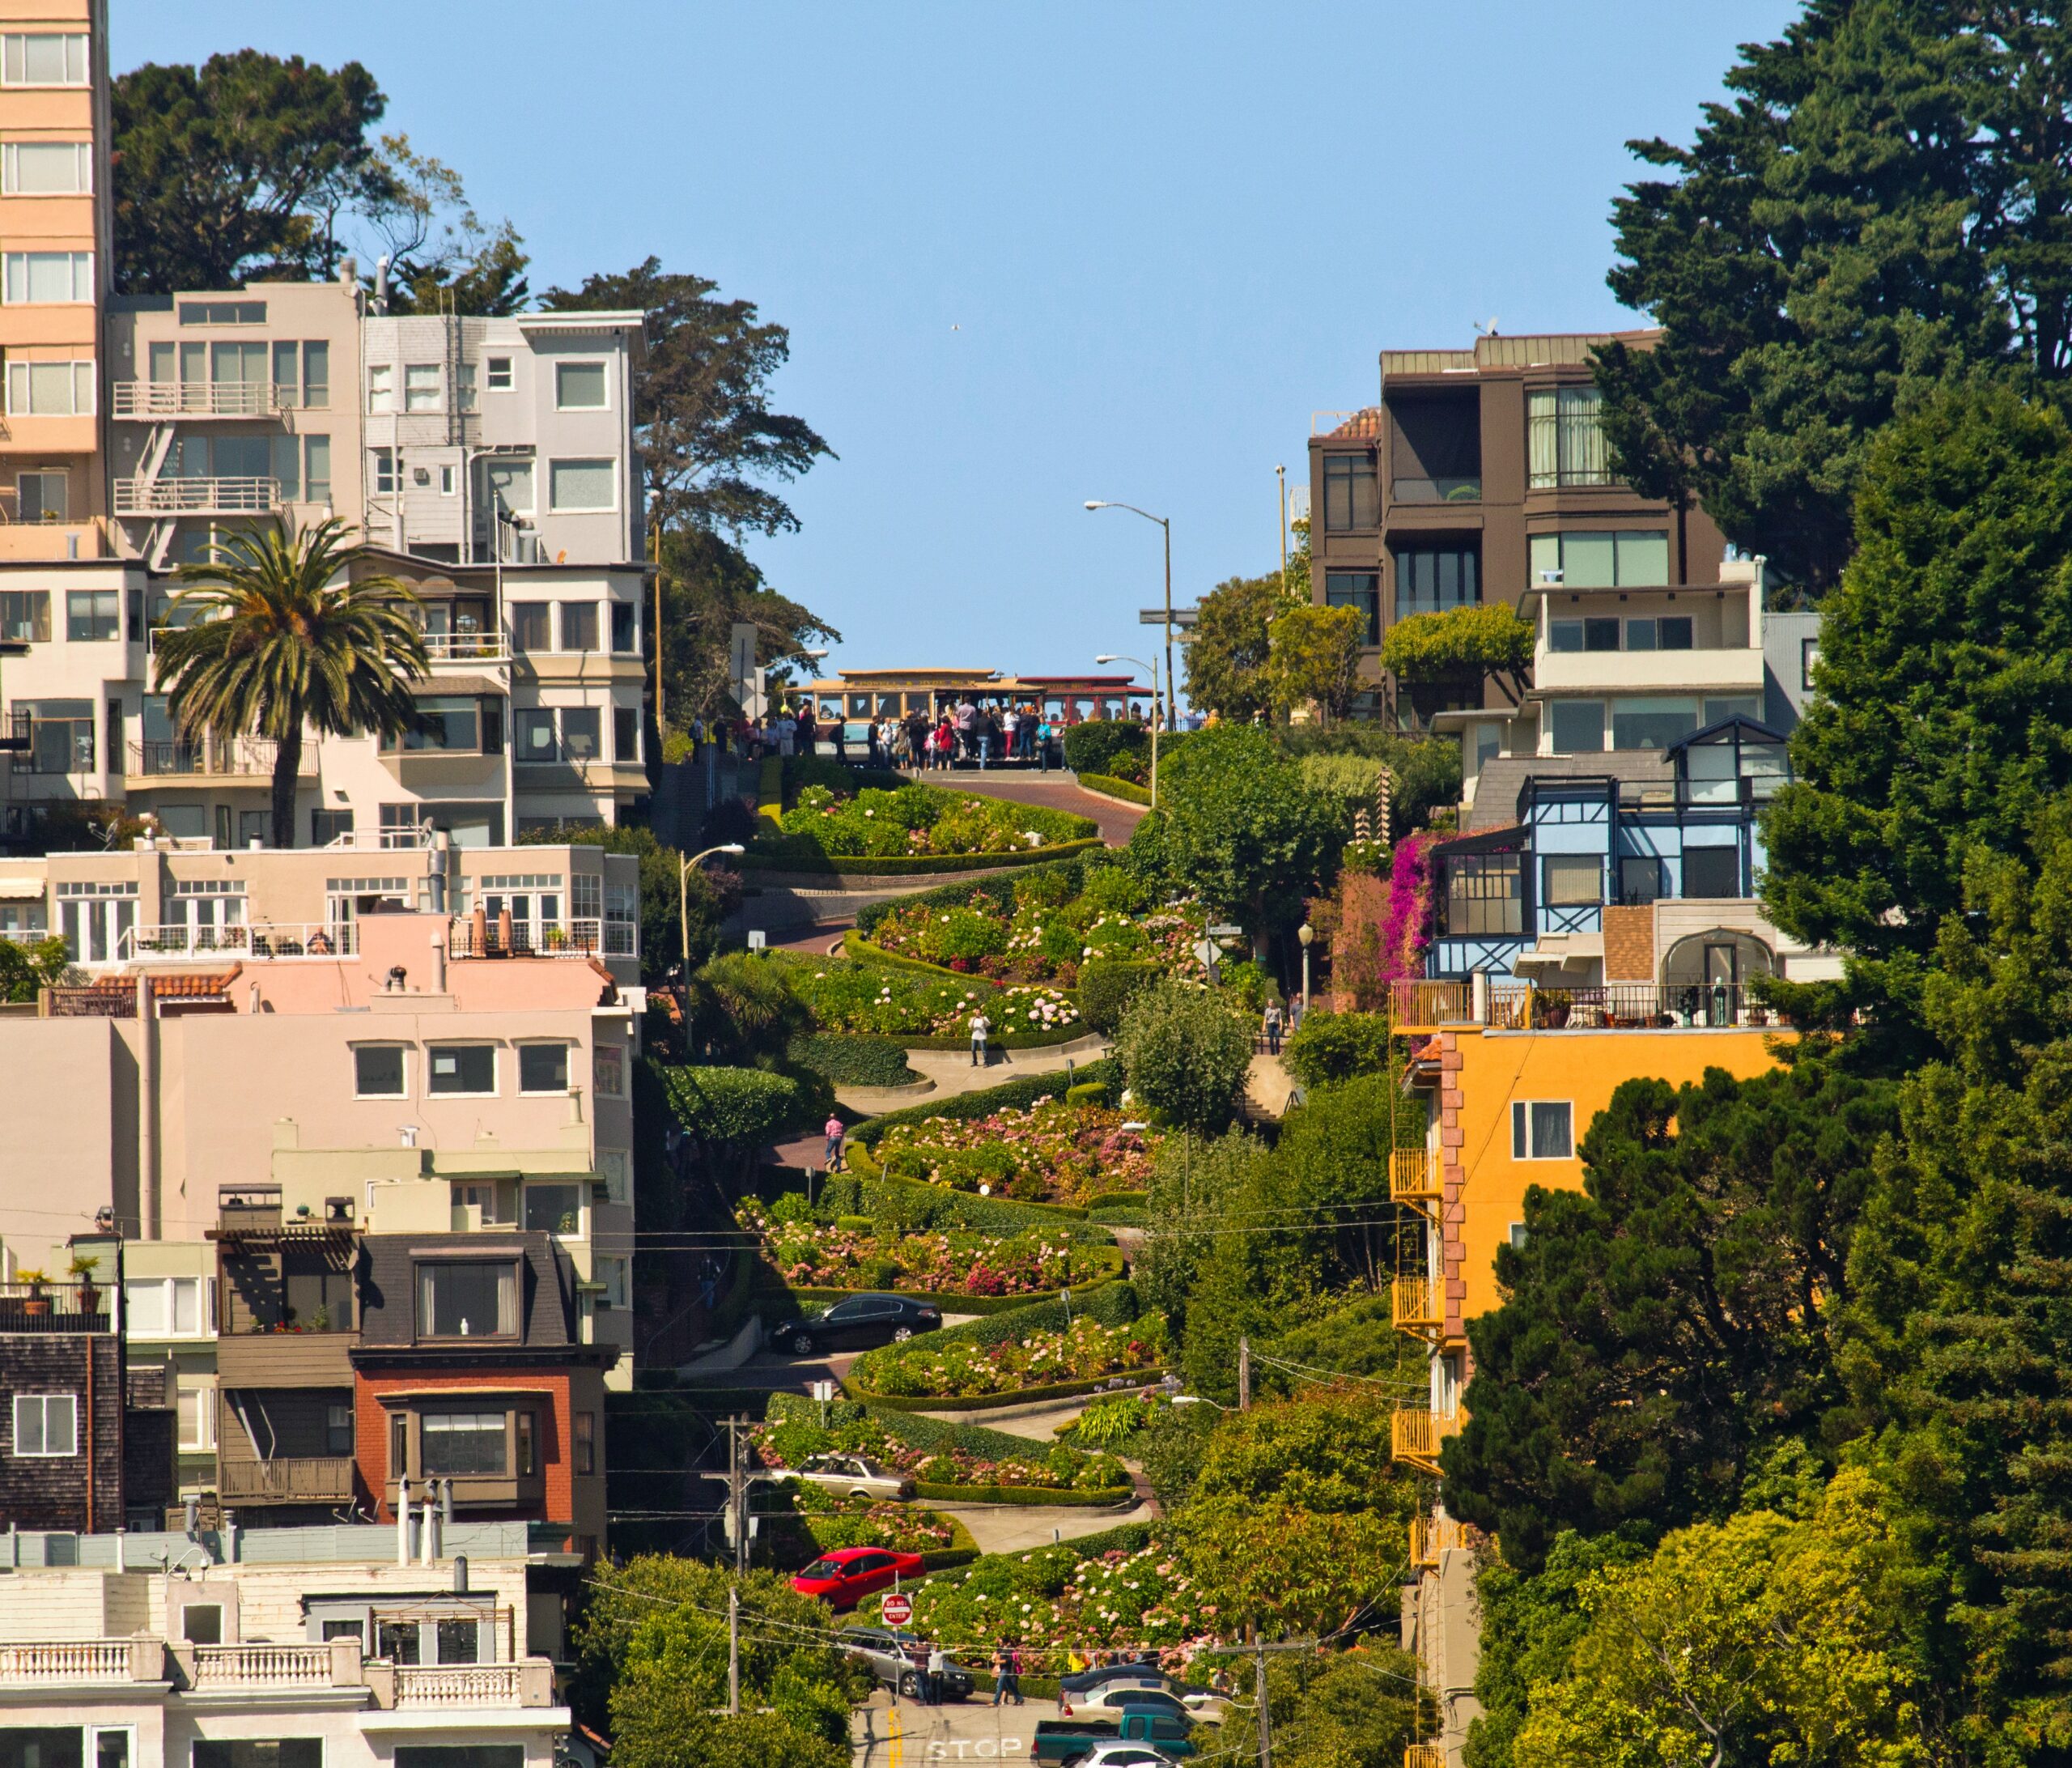 San Francisco Examiner: “Why housing experts say SF zoning &#8216;a total mismatch&#8217; from its needs&#8221;